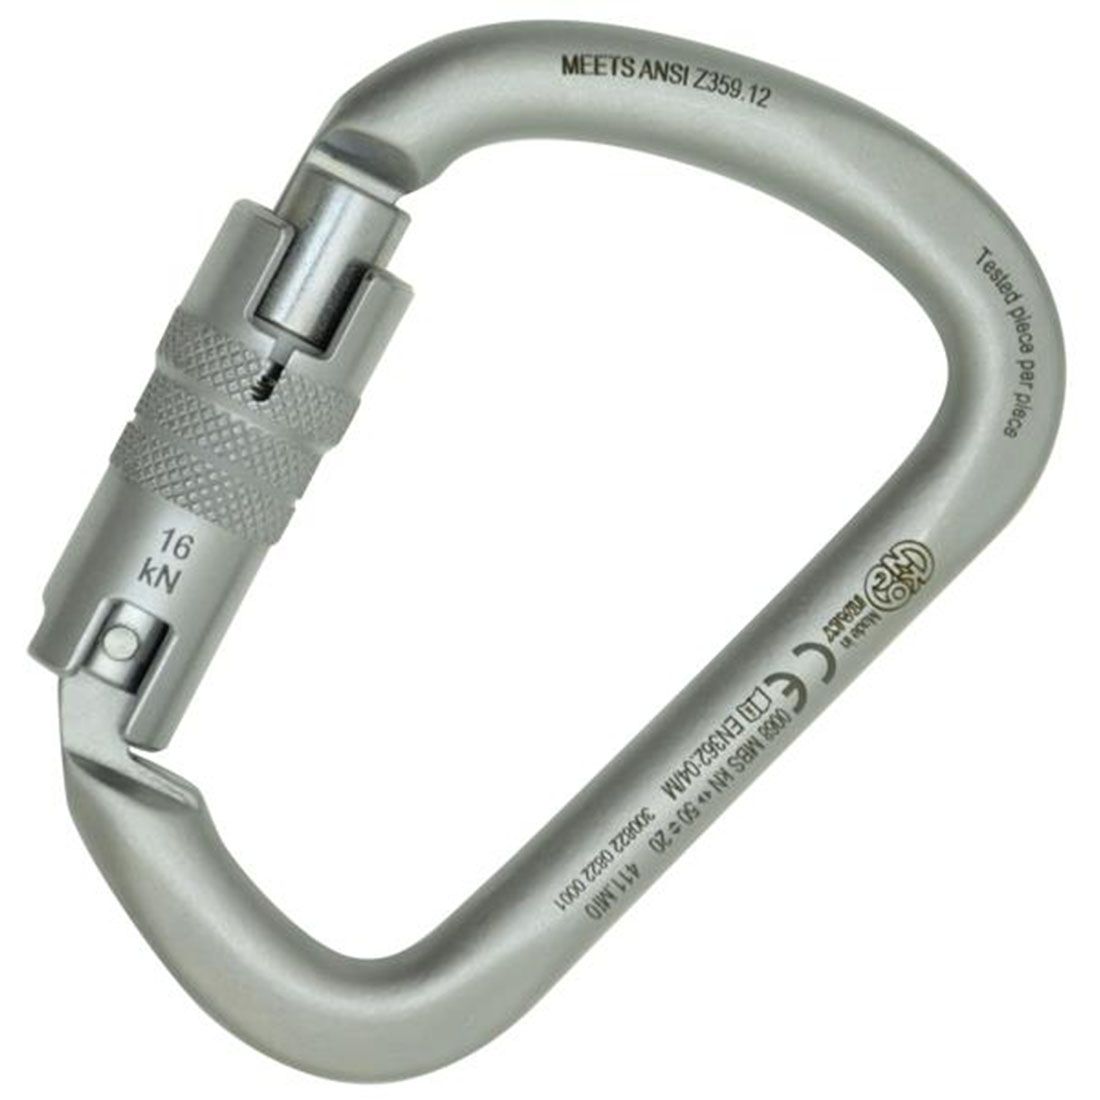 CARABINERS & SNAP HOOKS, Products